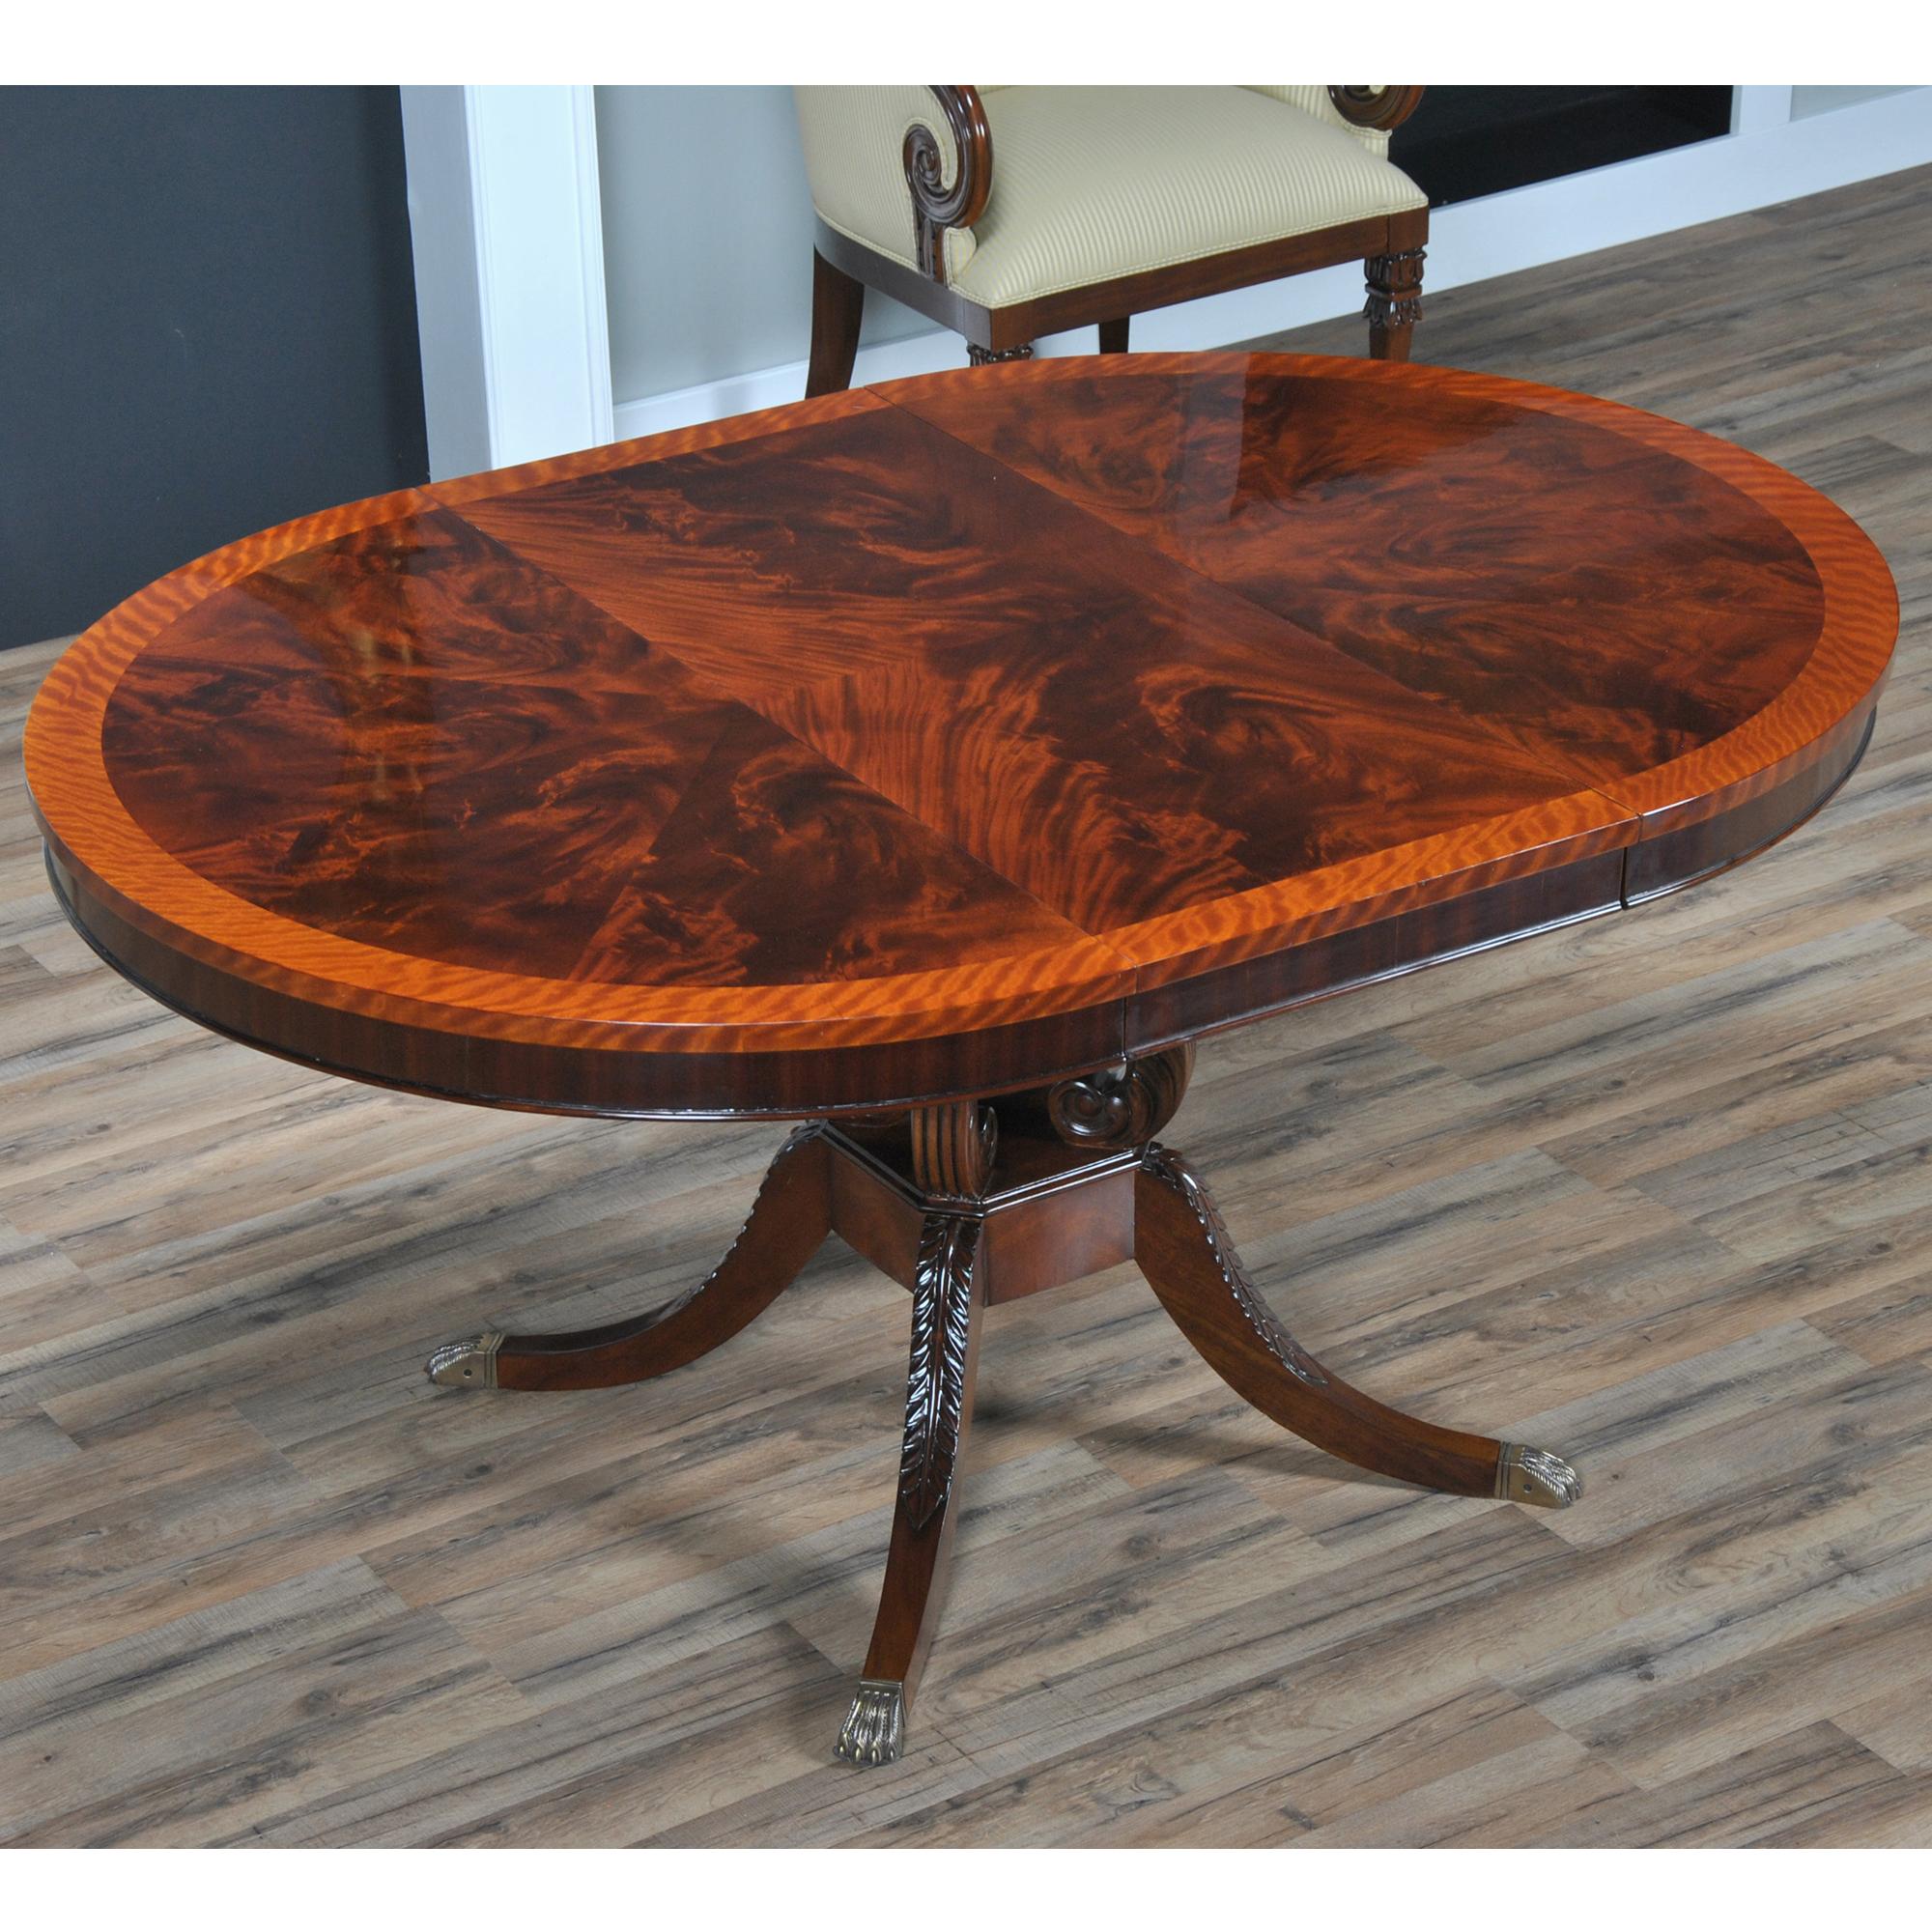 The Lyre or Harp Base Dining Table. Always popular this round to oval shaped dining table rests on a lyre base which matches many other items in our collections. Please see the related products tab below for chairs, benches and other related pieces